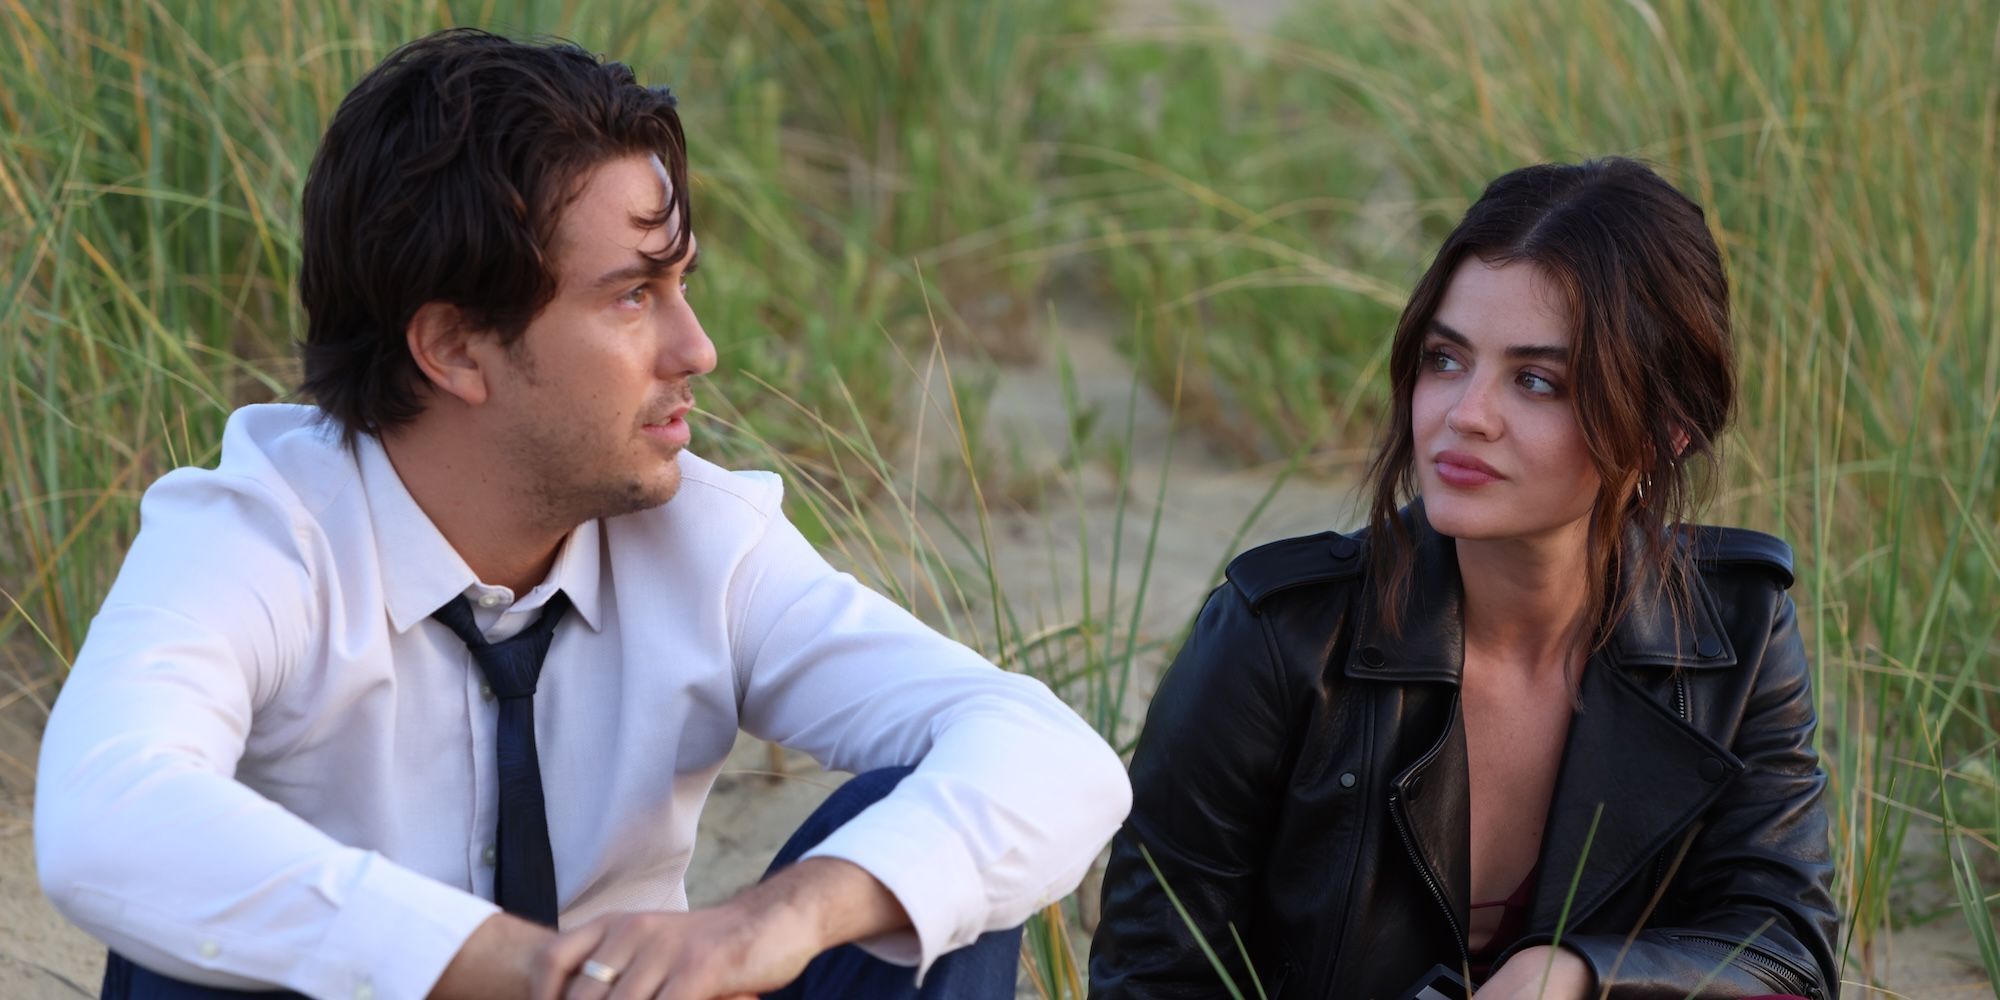 Nat Wolff and Lucy Hale talk about their romantic history in Which Brings Me To You